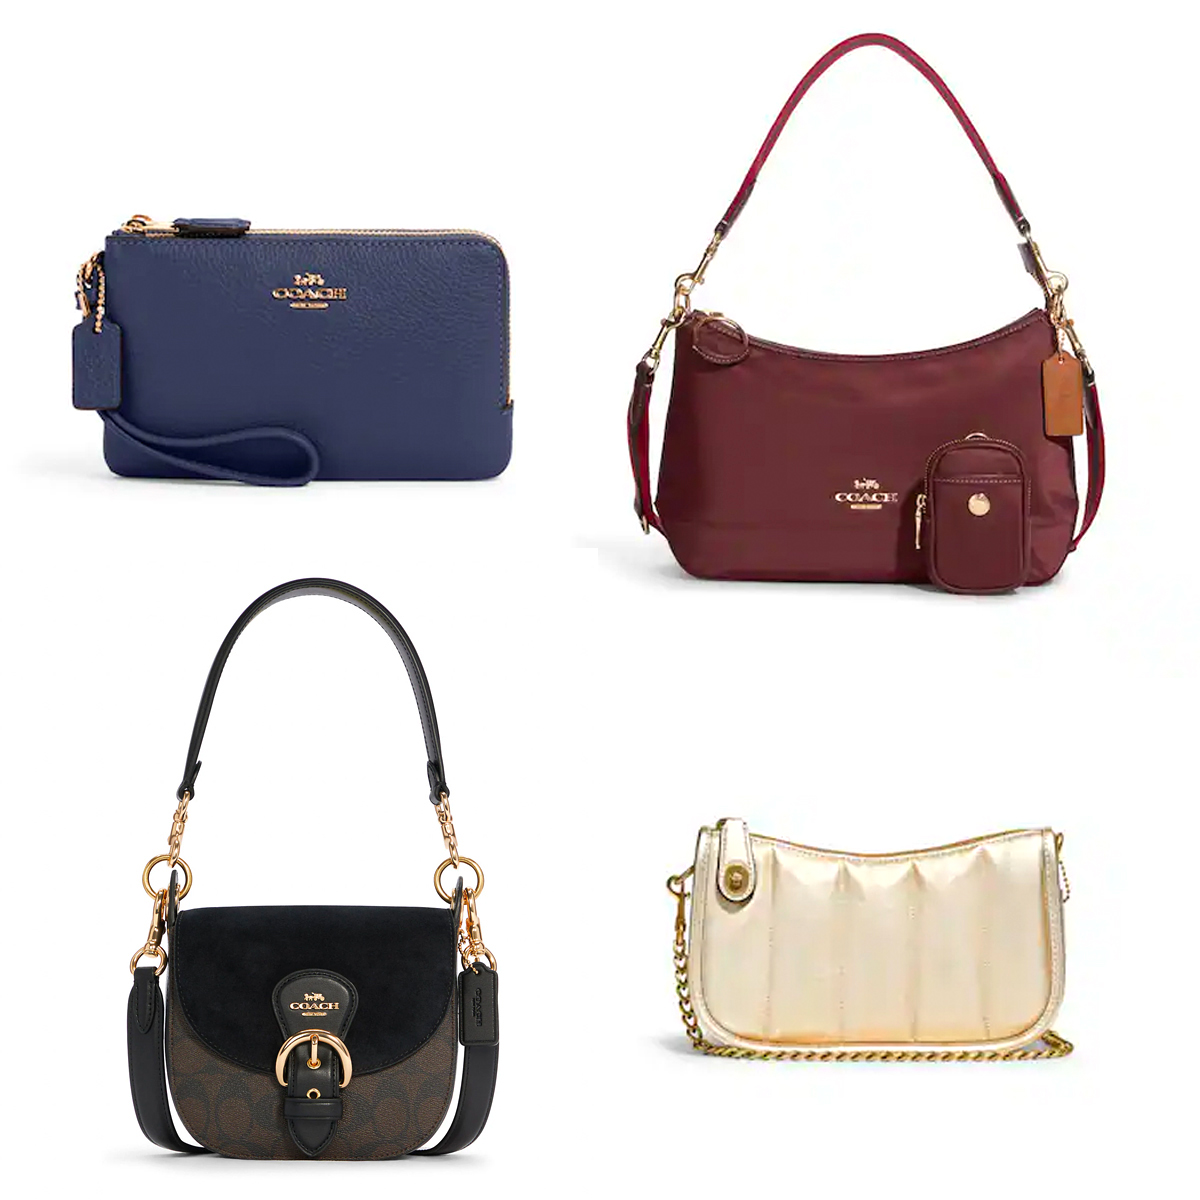 Coach Handbags and Accessories Are on Sale for Up to 70% Off